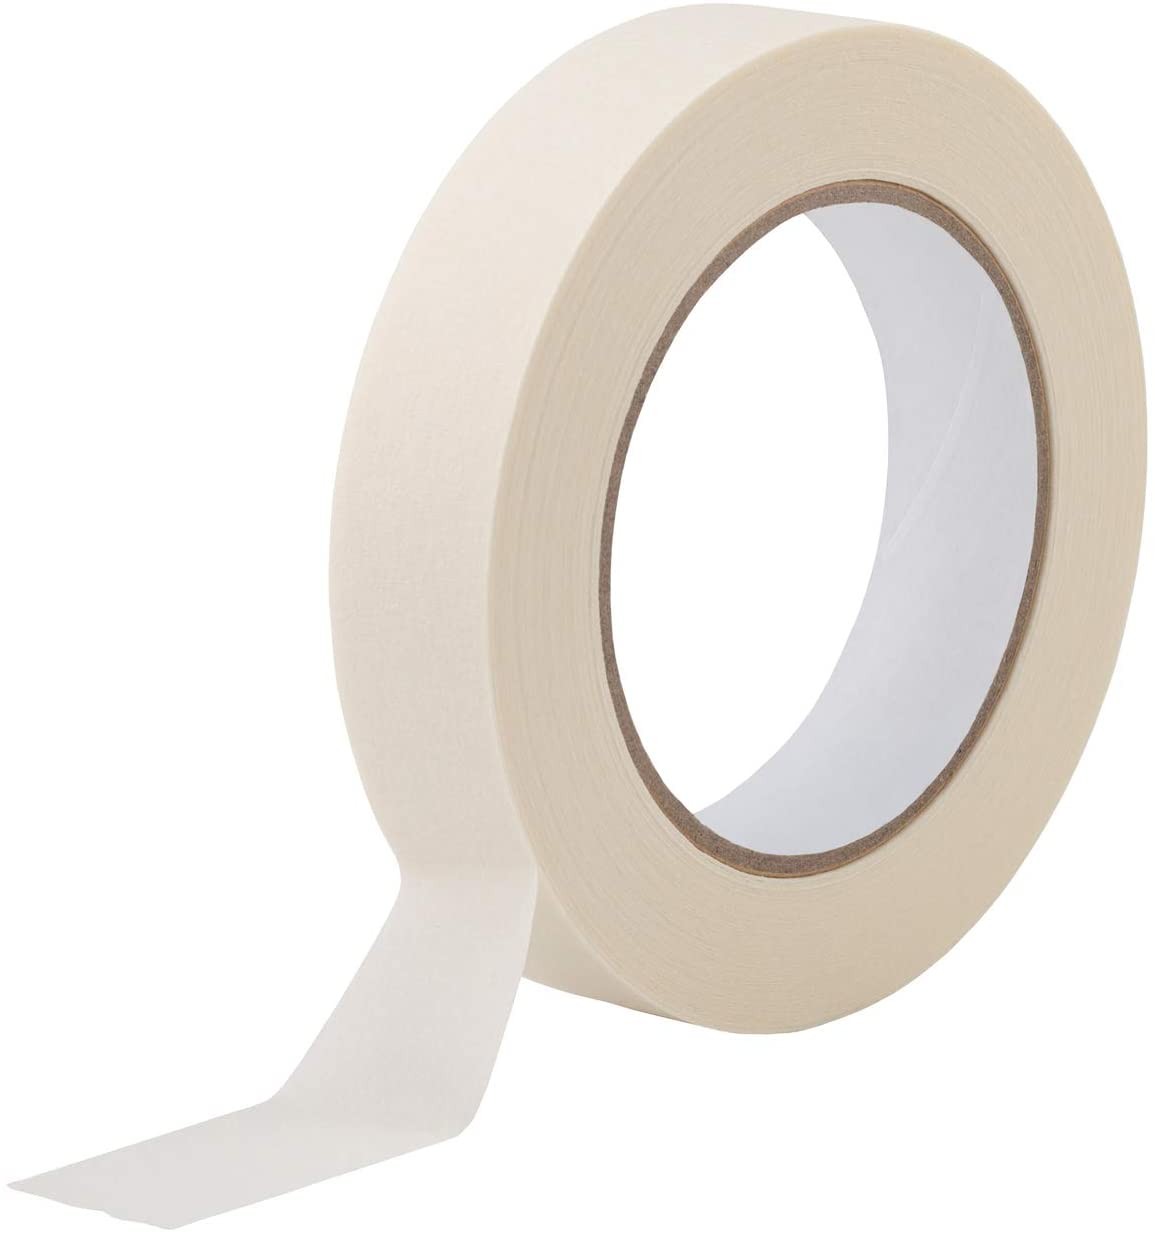 General Purpose Beige White Color masking tape for Painting, Home, Office, School Stationery, Arts